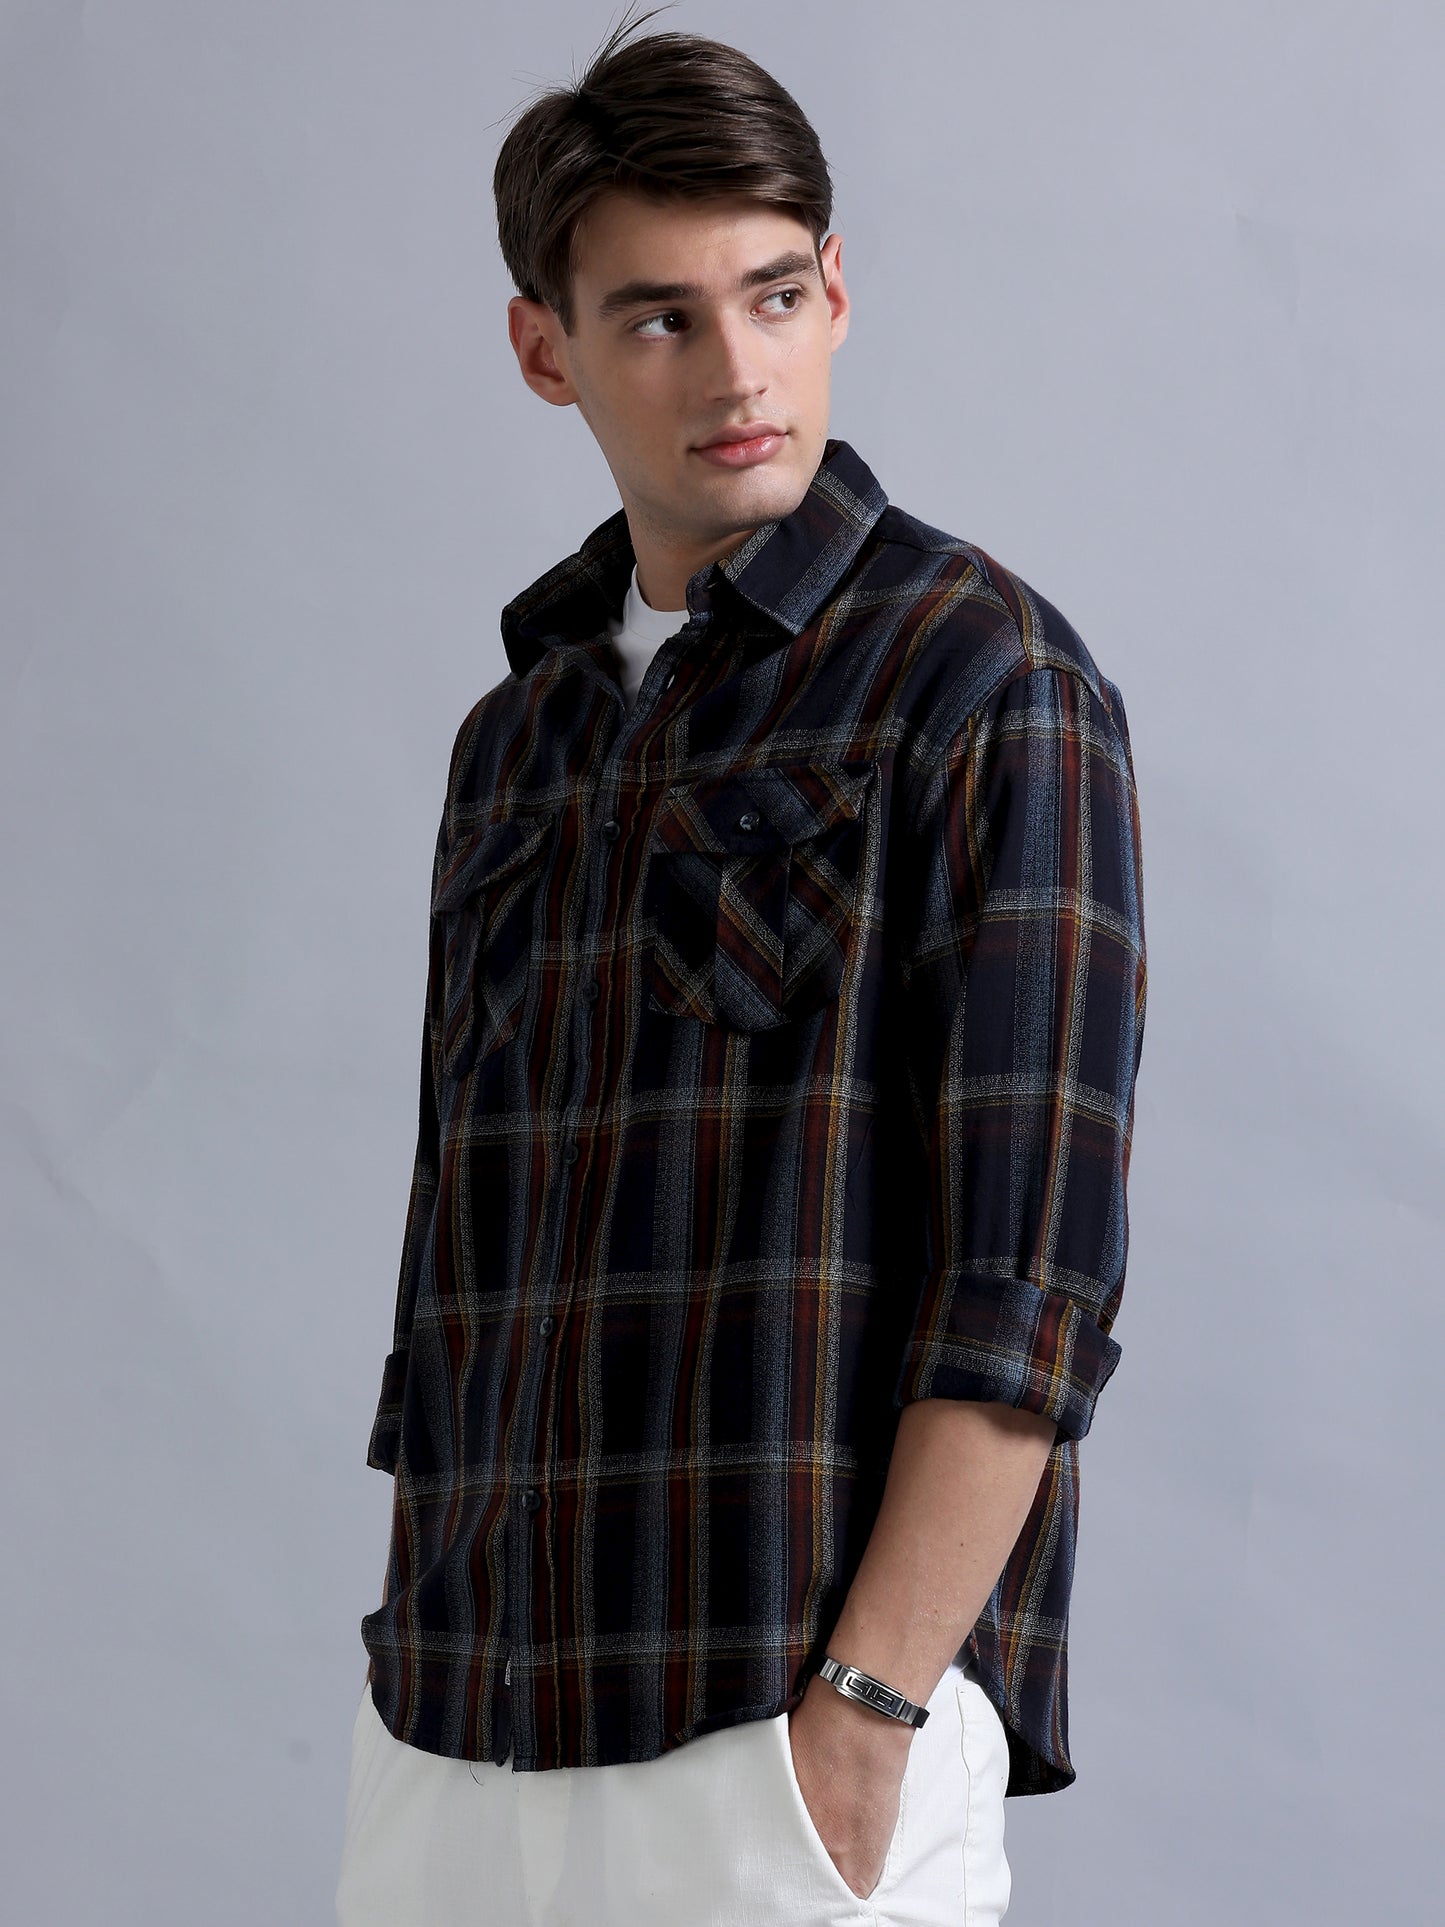 Premium Men Shirt, Relaxed Fit, Yarn Dyed Flannel Check, Pure Cotton, Full Sleeve, Navy Blue & Red